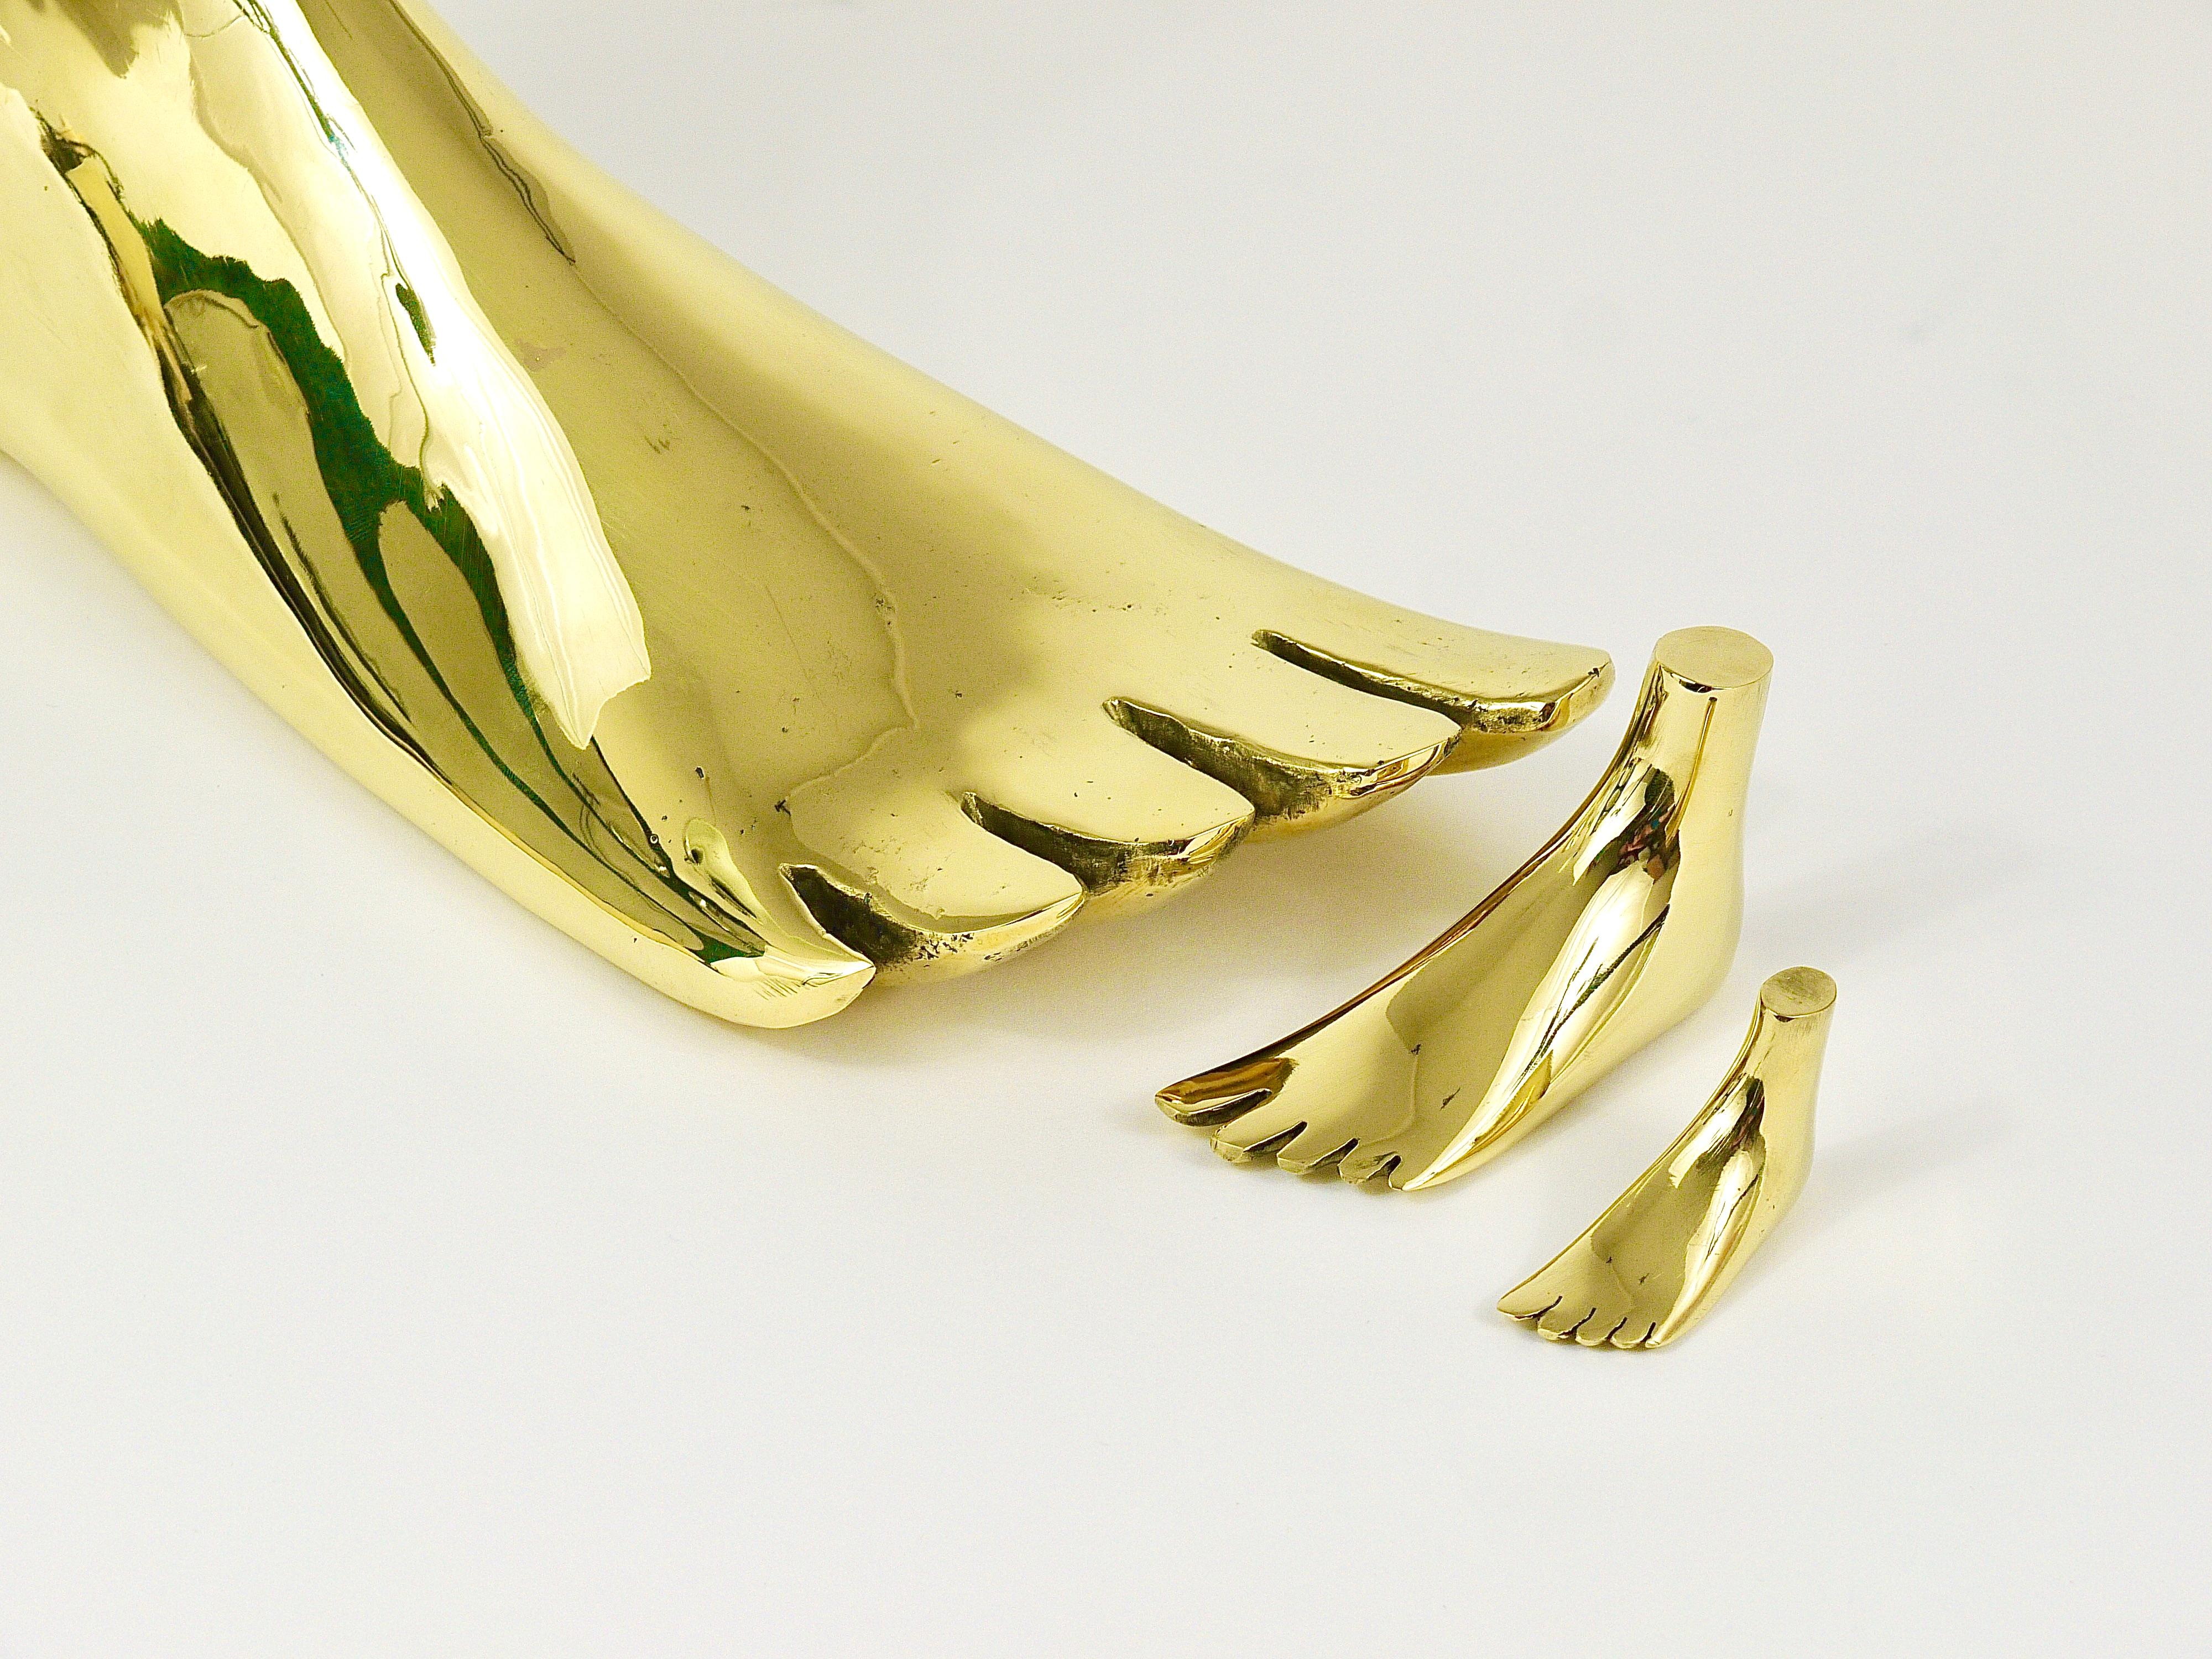 Signed Carl Auböck Midcentury Brass Foot Paperweight Handmade Sculpture For Sale 4